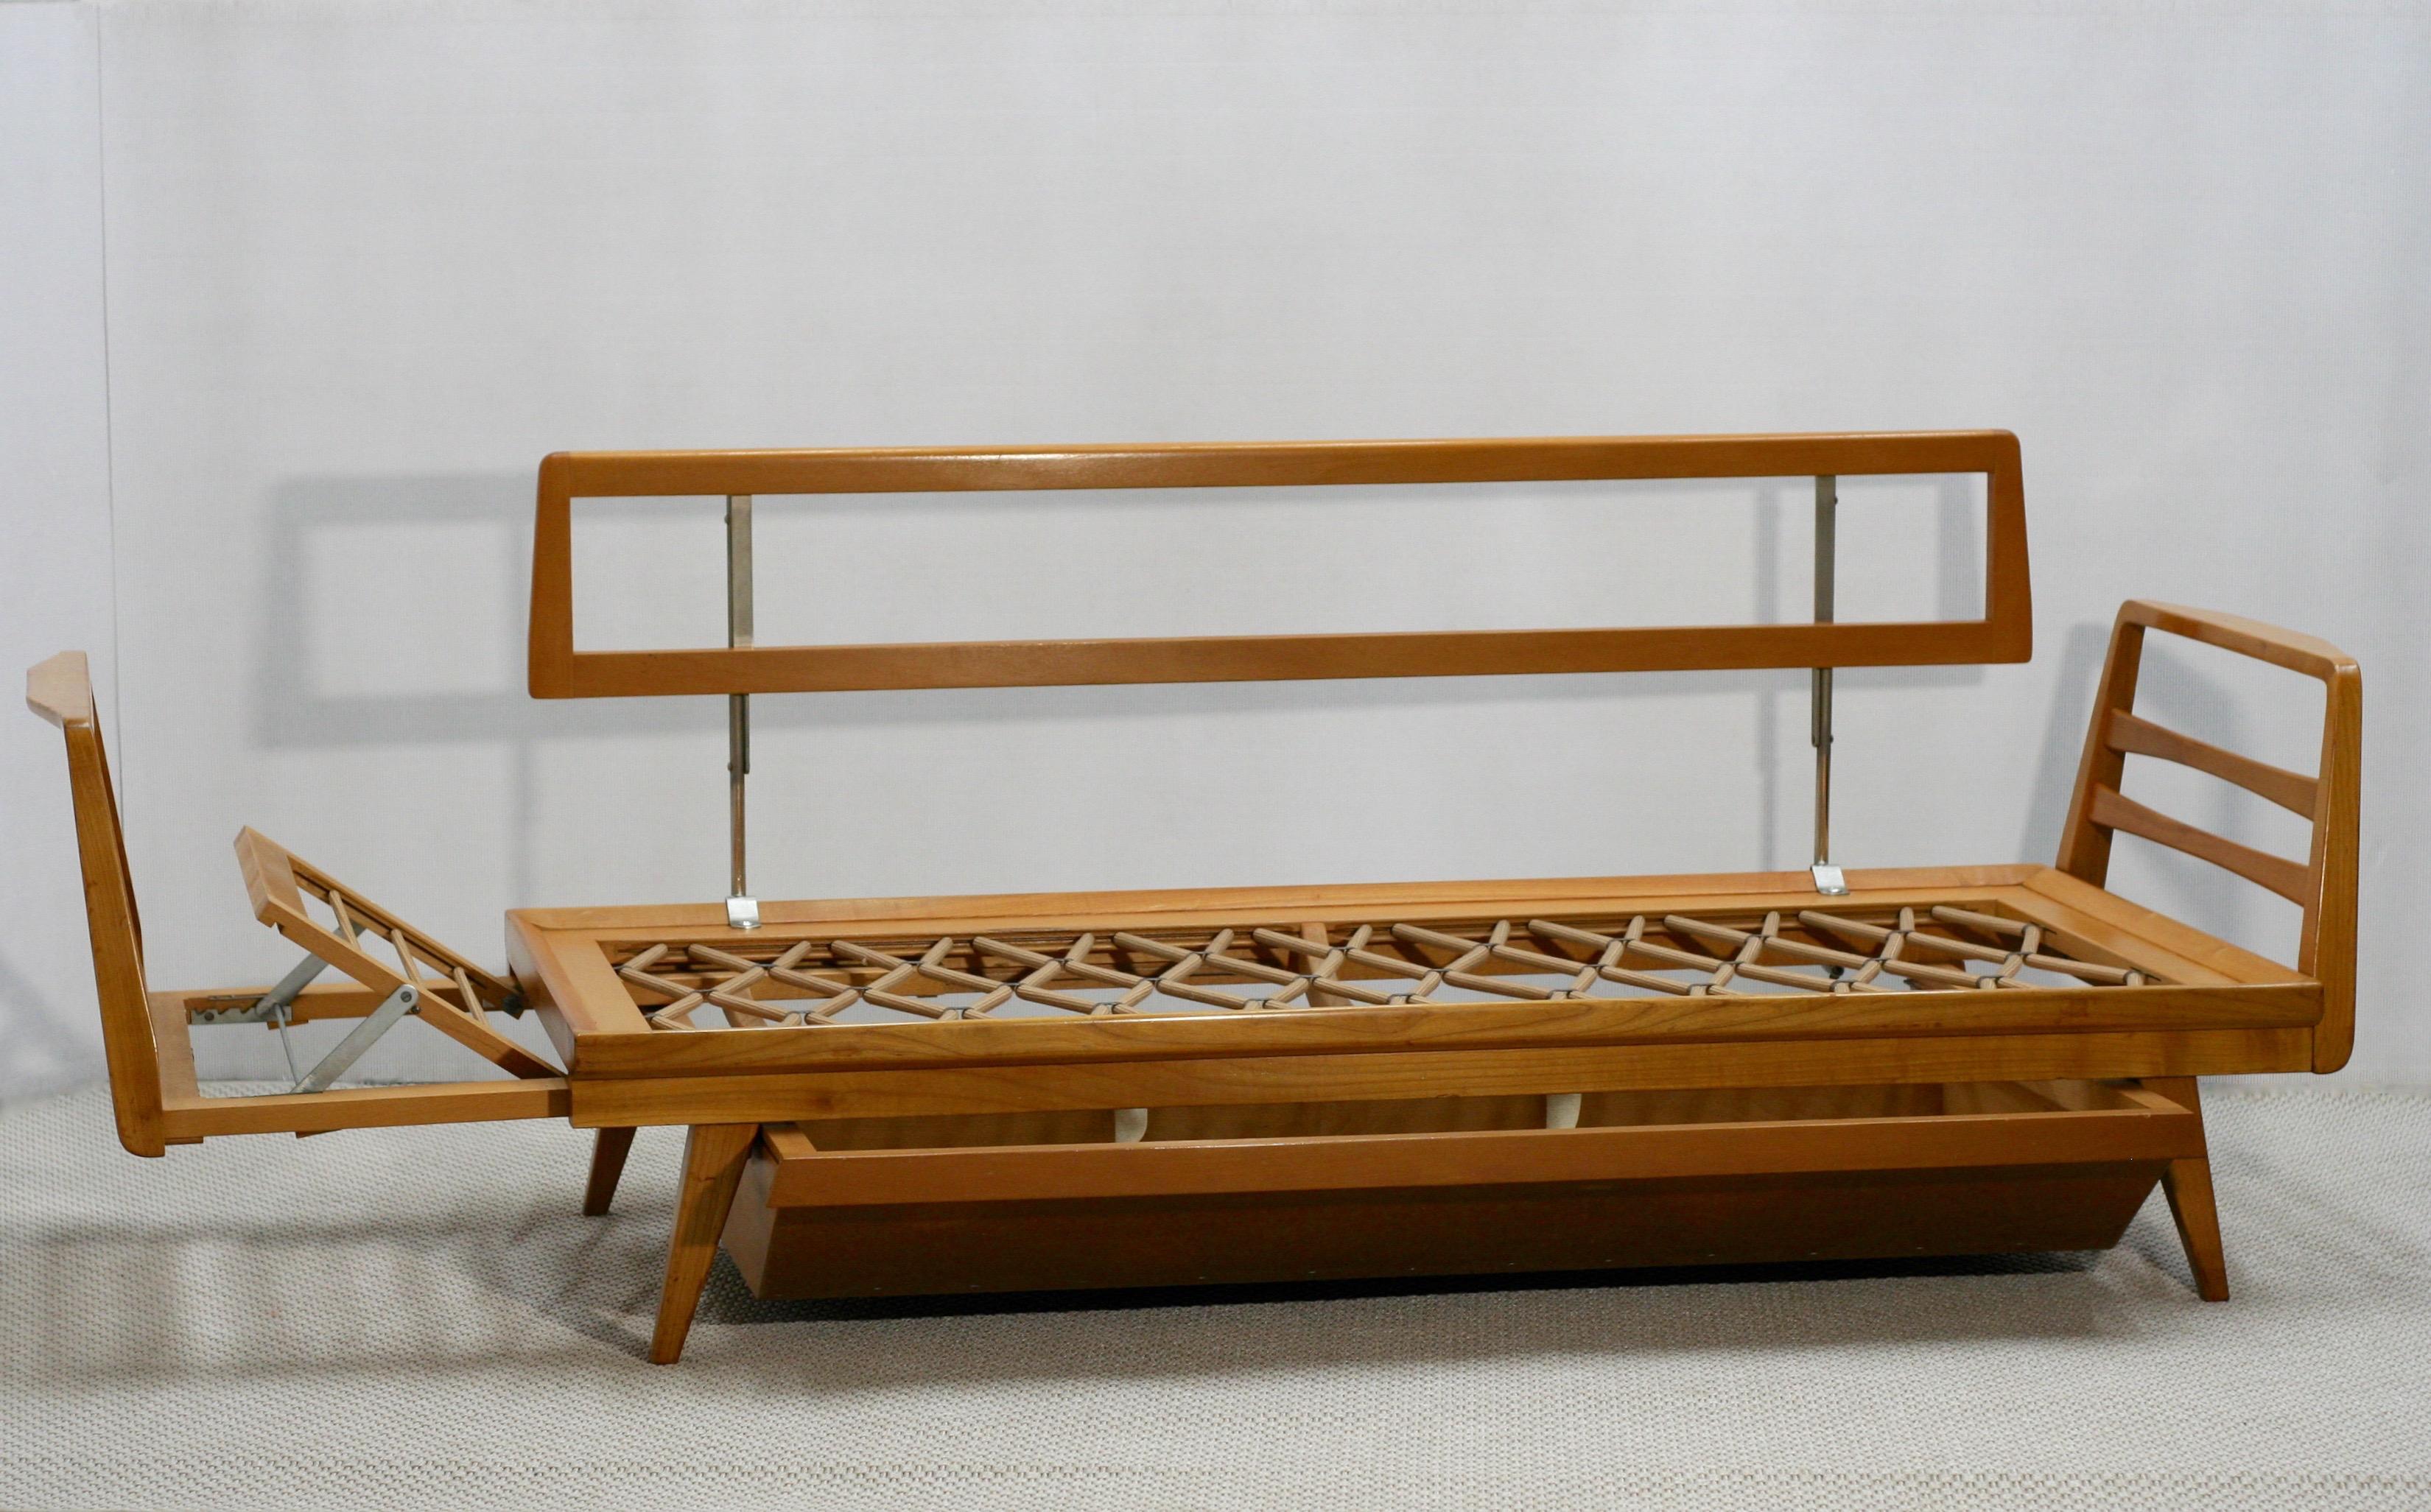 Fabric MidCentury German Extendable Beech Wood Daybed Sofa from Knoll Antimott, 1950s For Sale